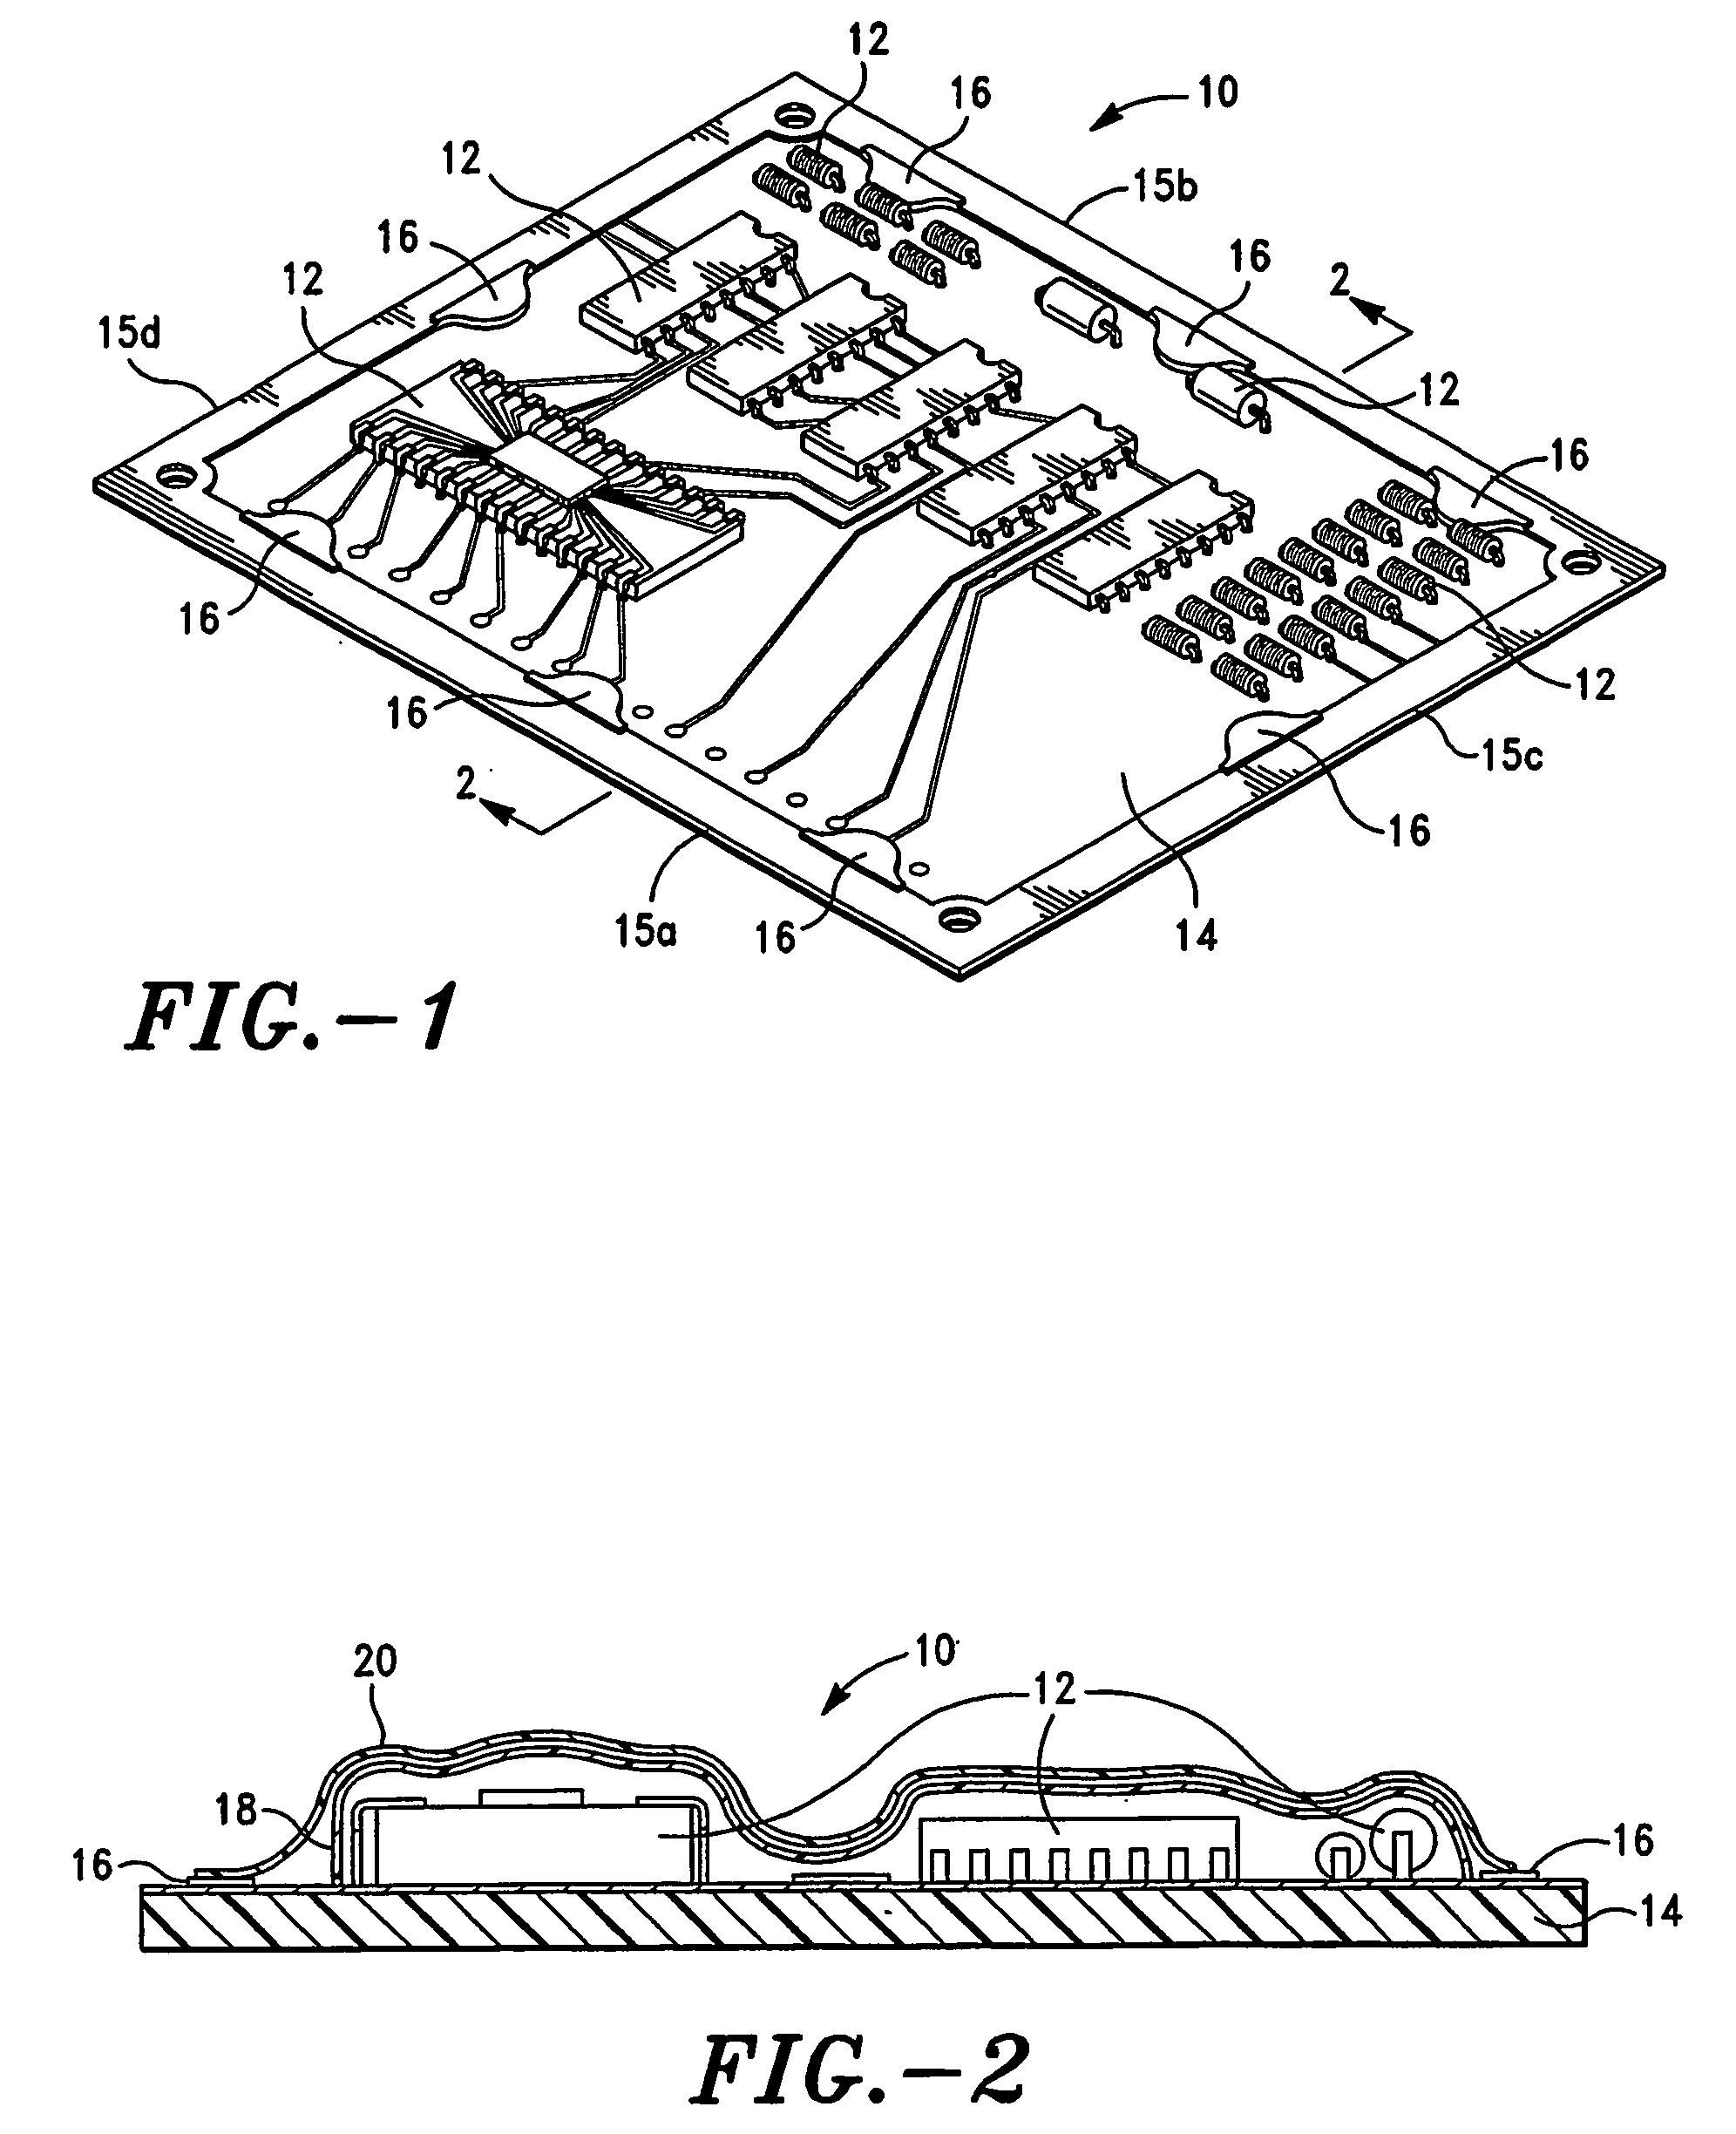 Method and apparatus for reducing electromagnetic emissions from electronic circuits